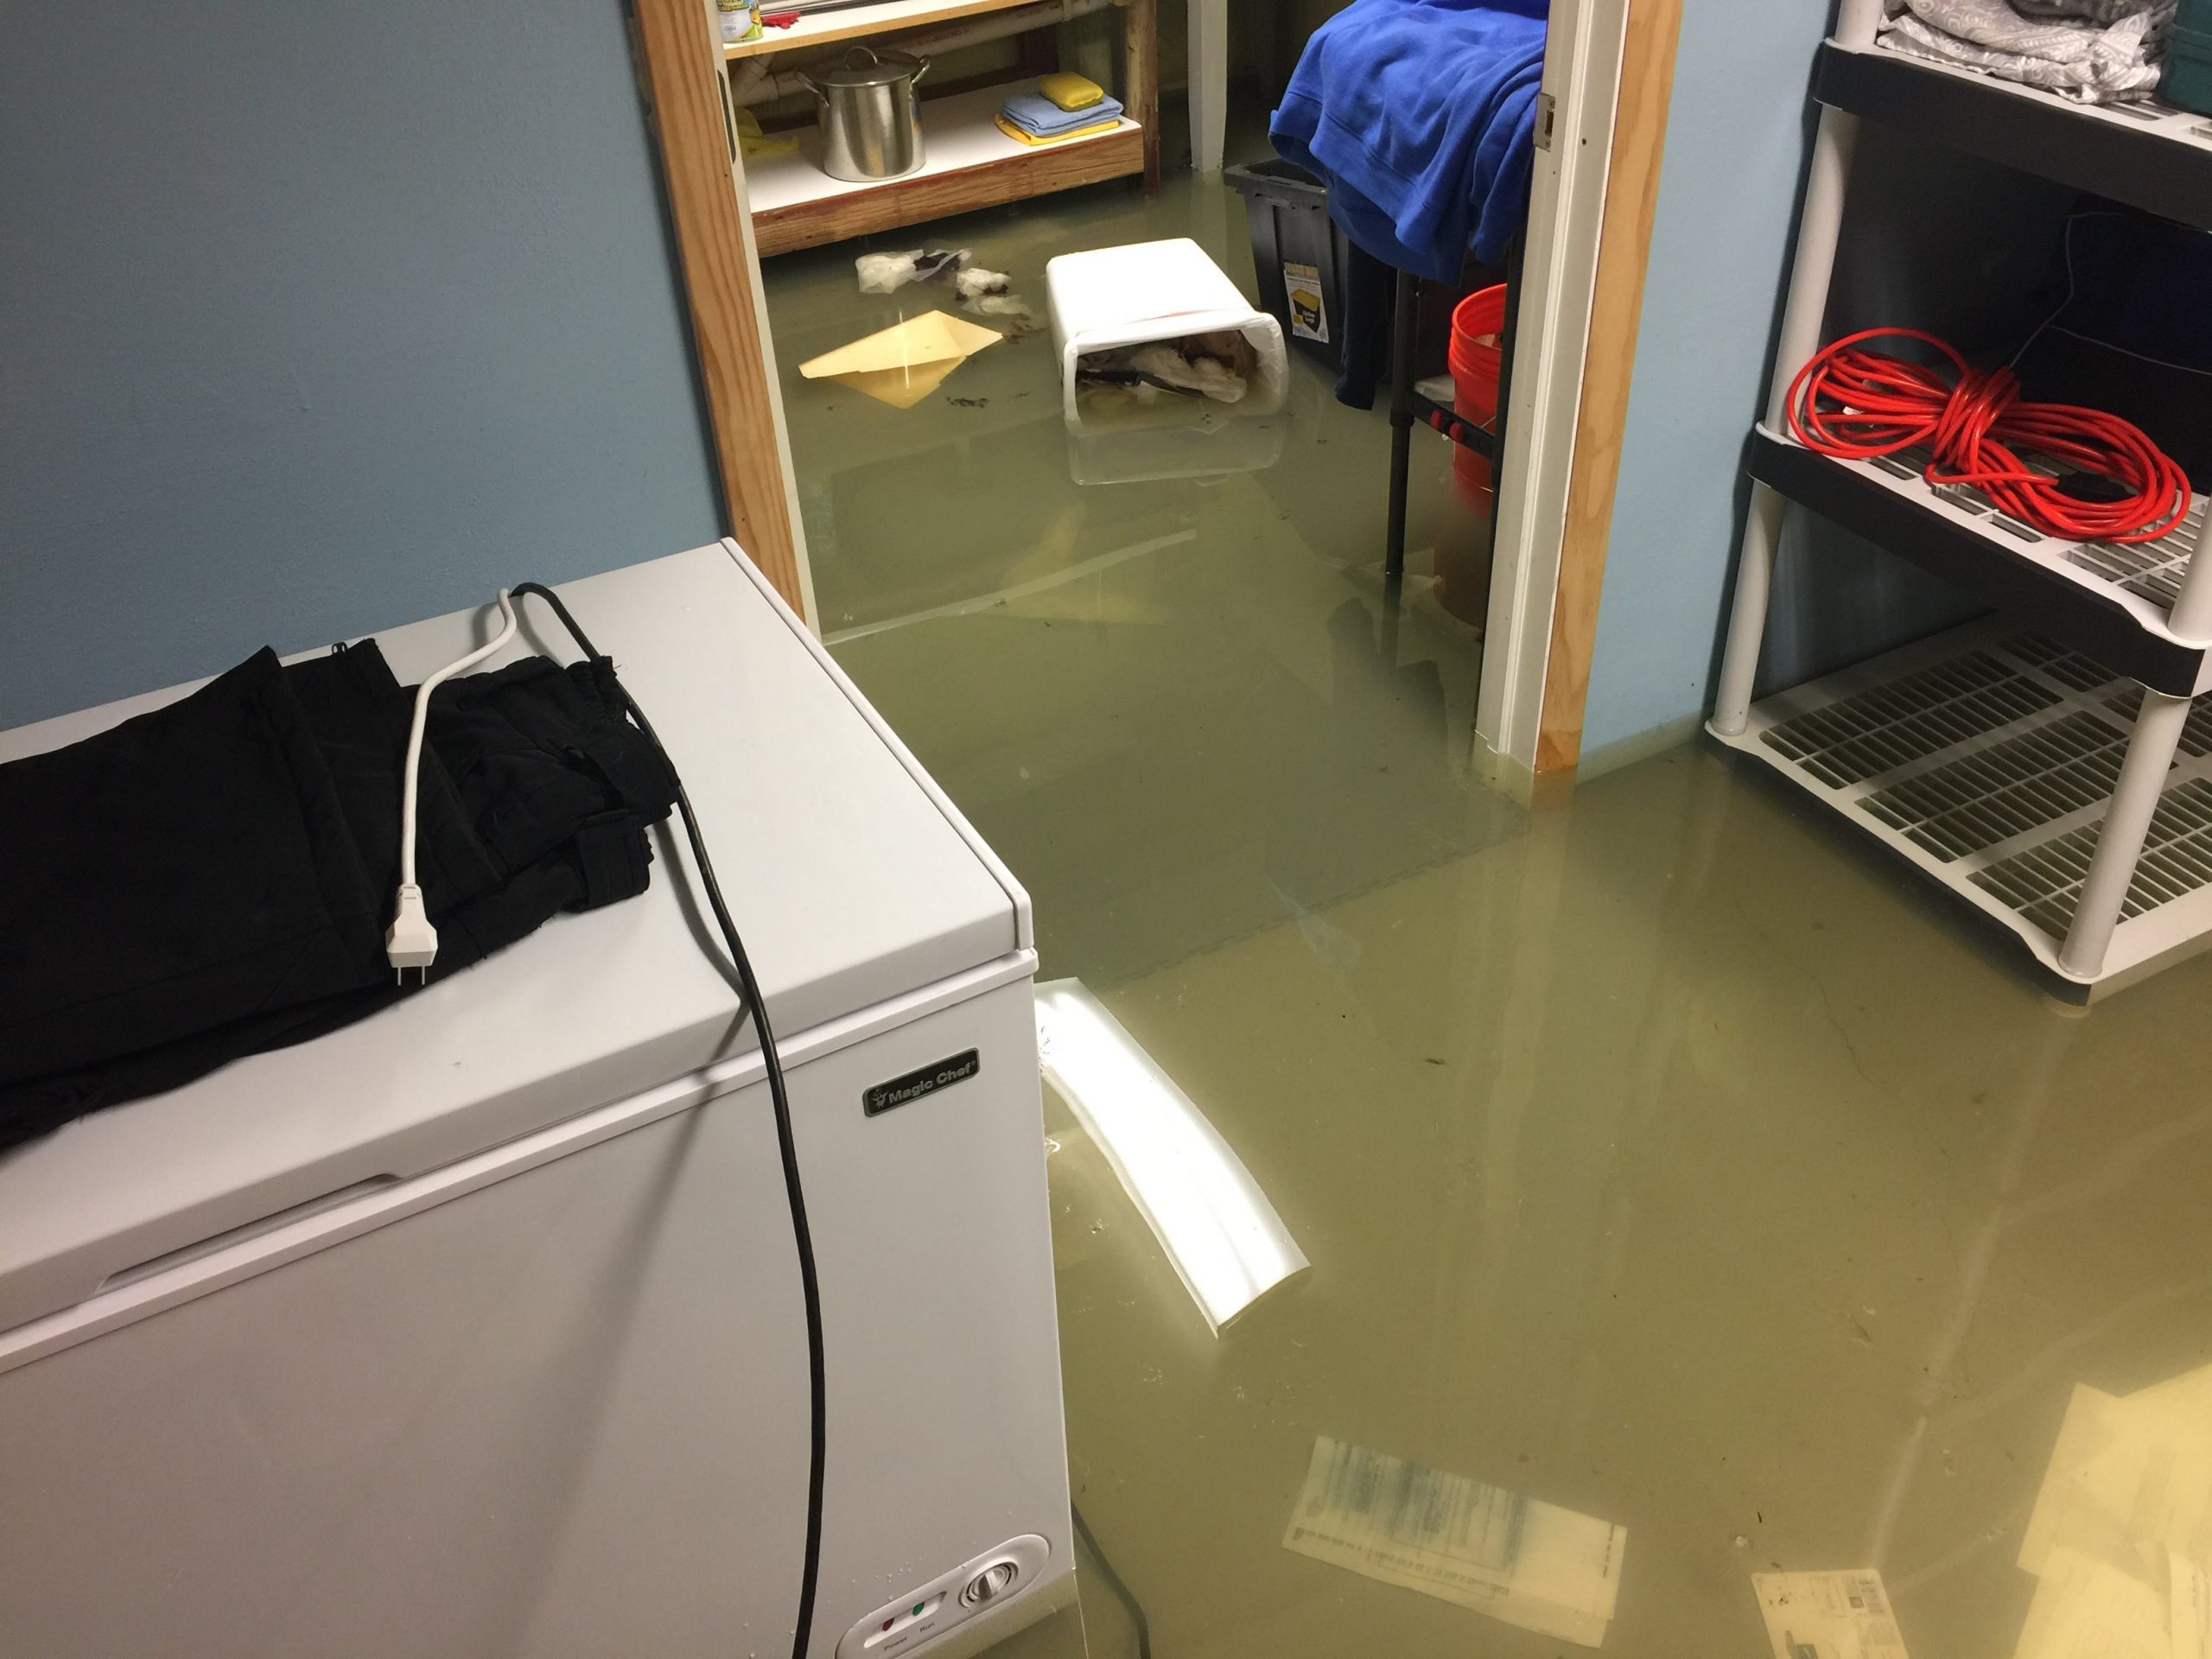 Flooded basement with homeowner's possessions floating around